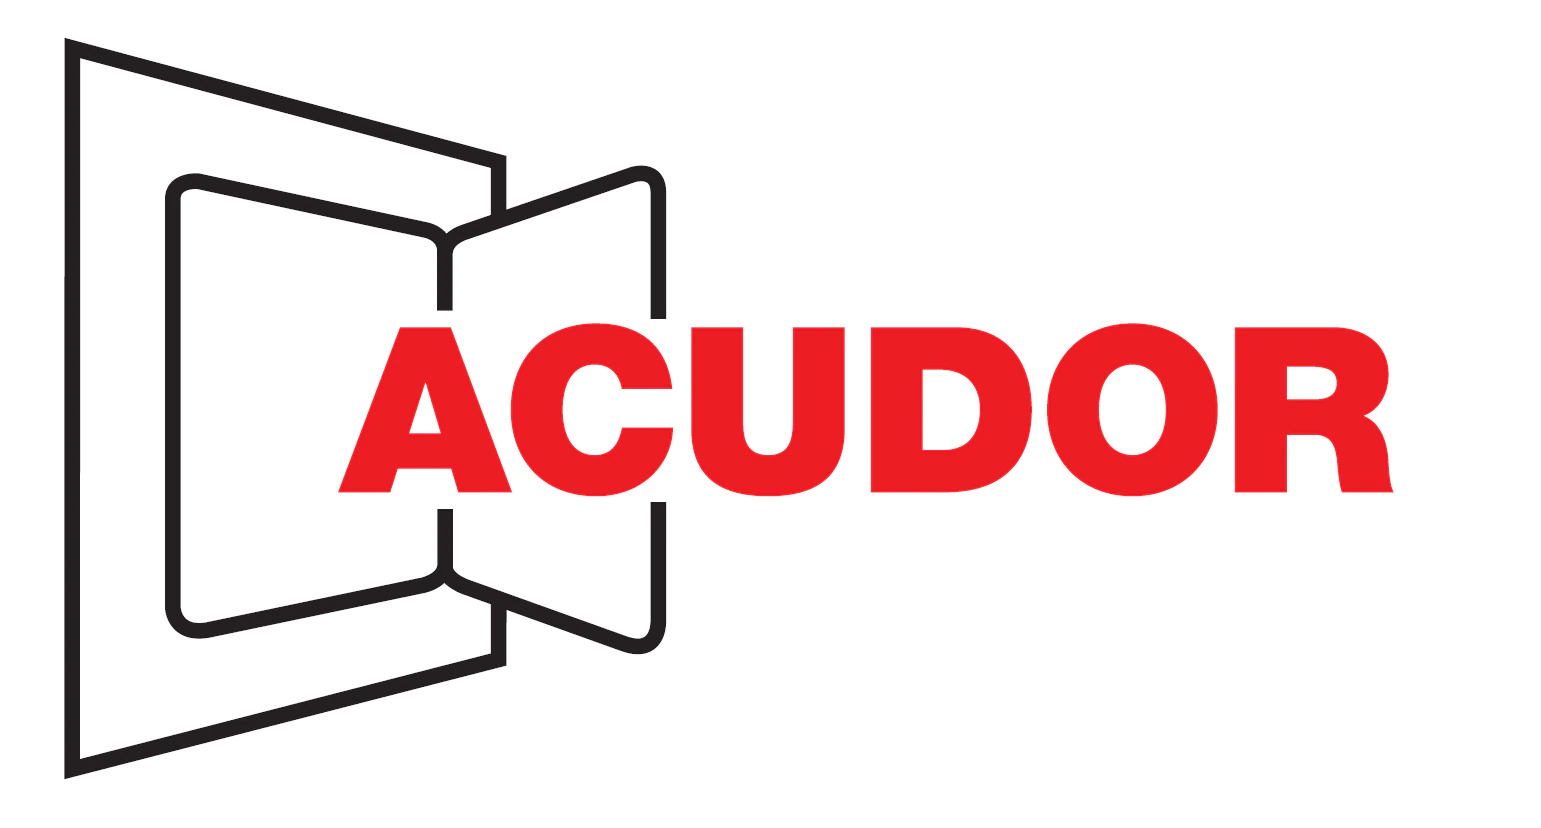 Acudor Access Panels